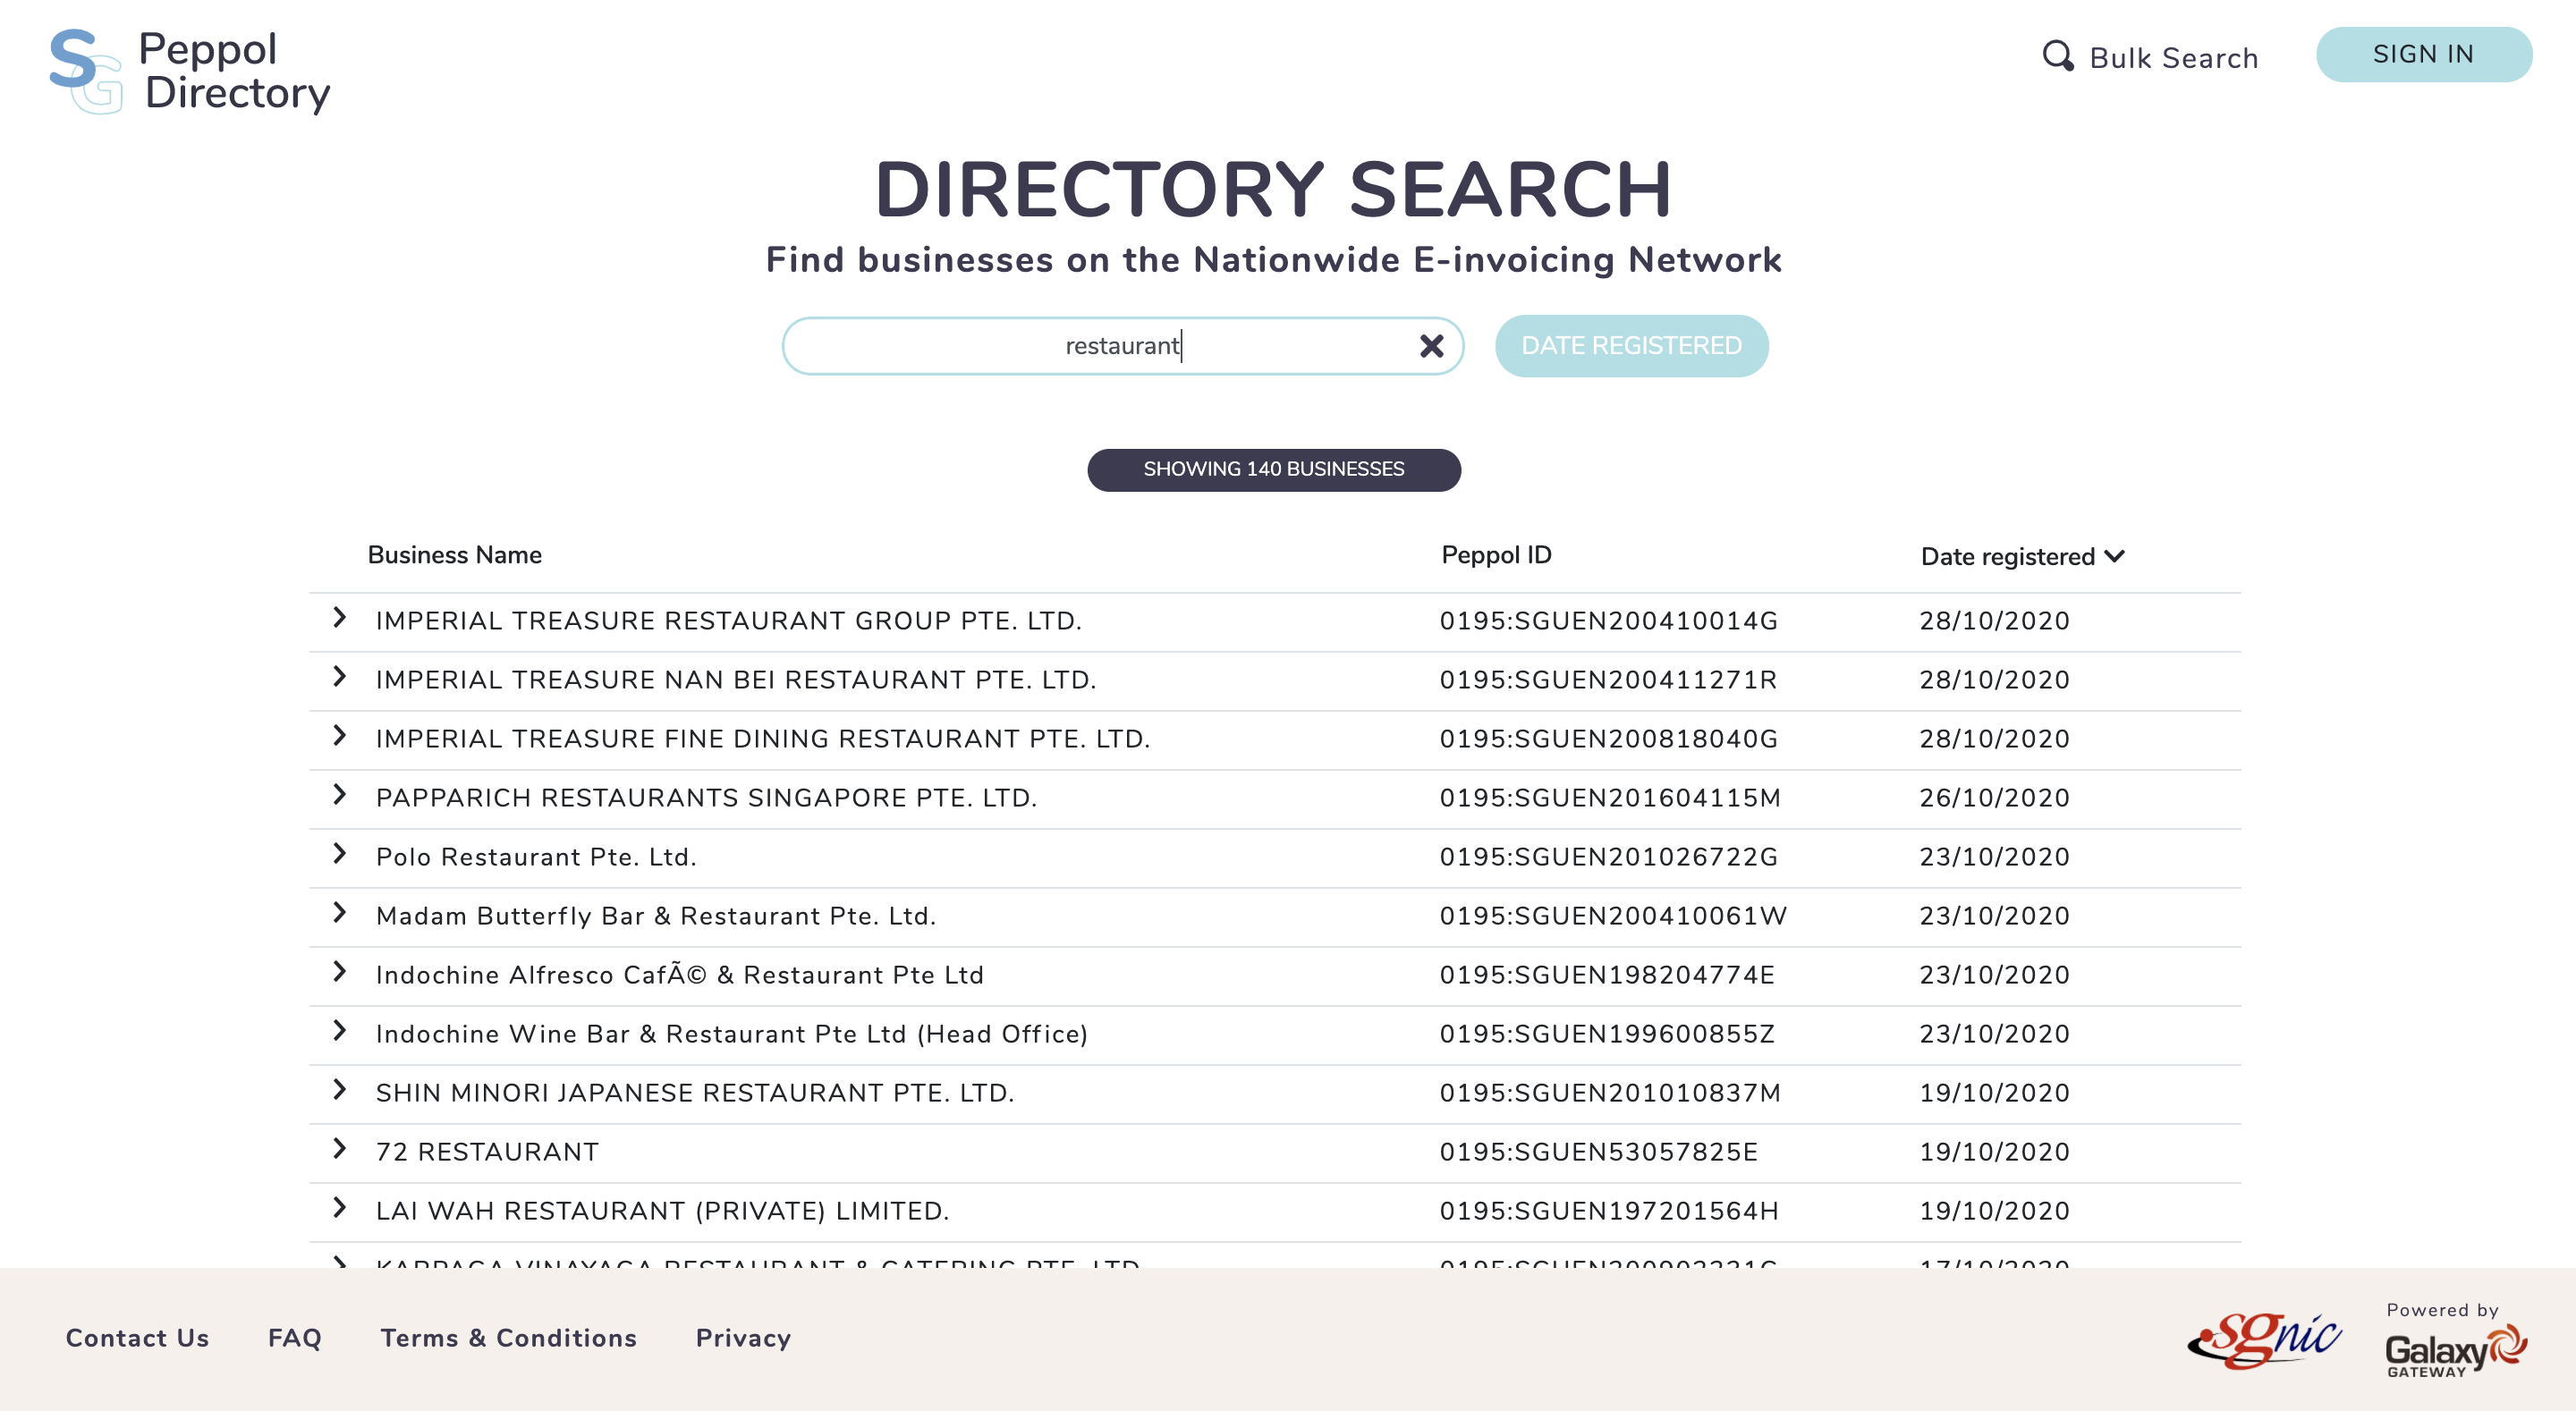 The SG Peppol Directory: A simple search for Singapore businesses that are e-invoicing solution providers